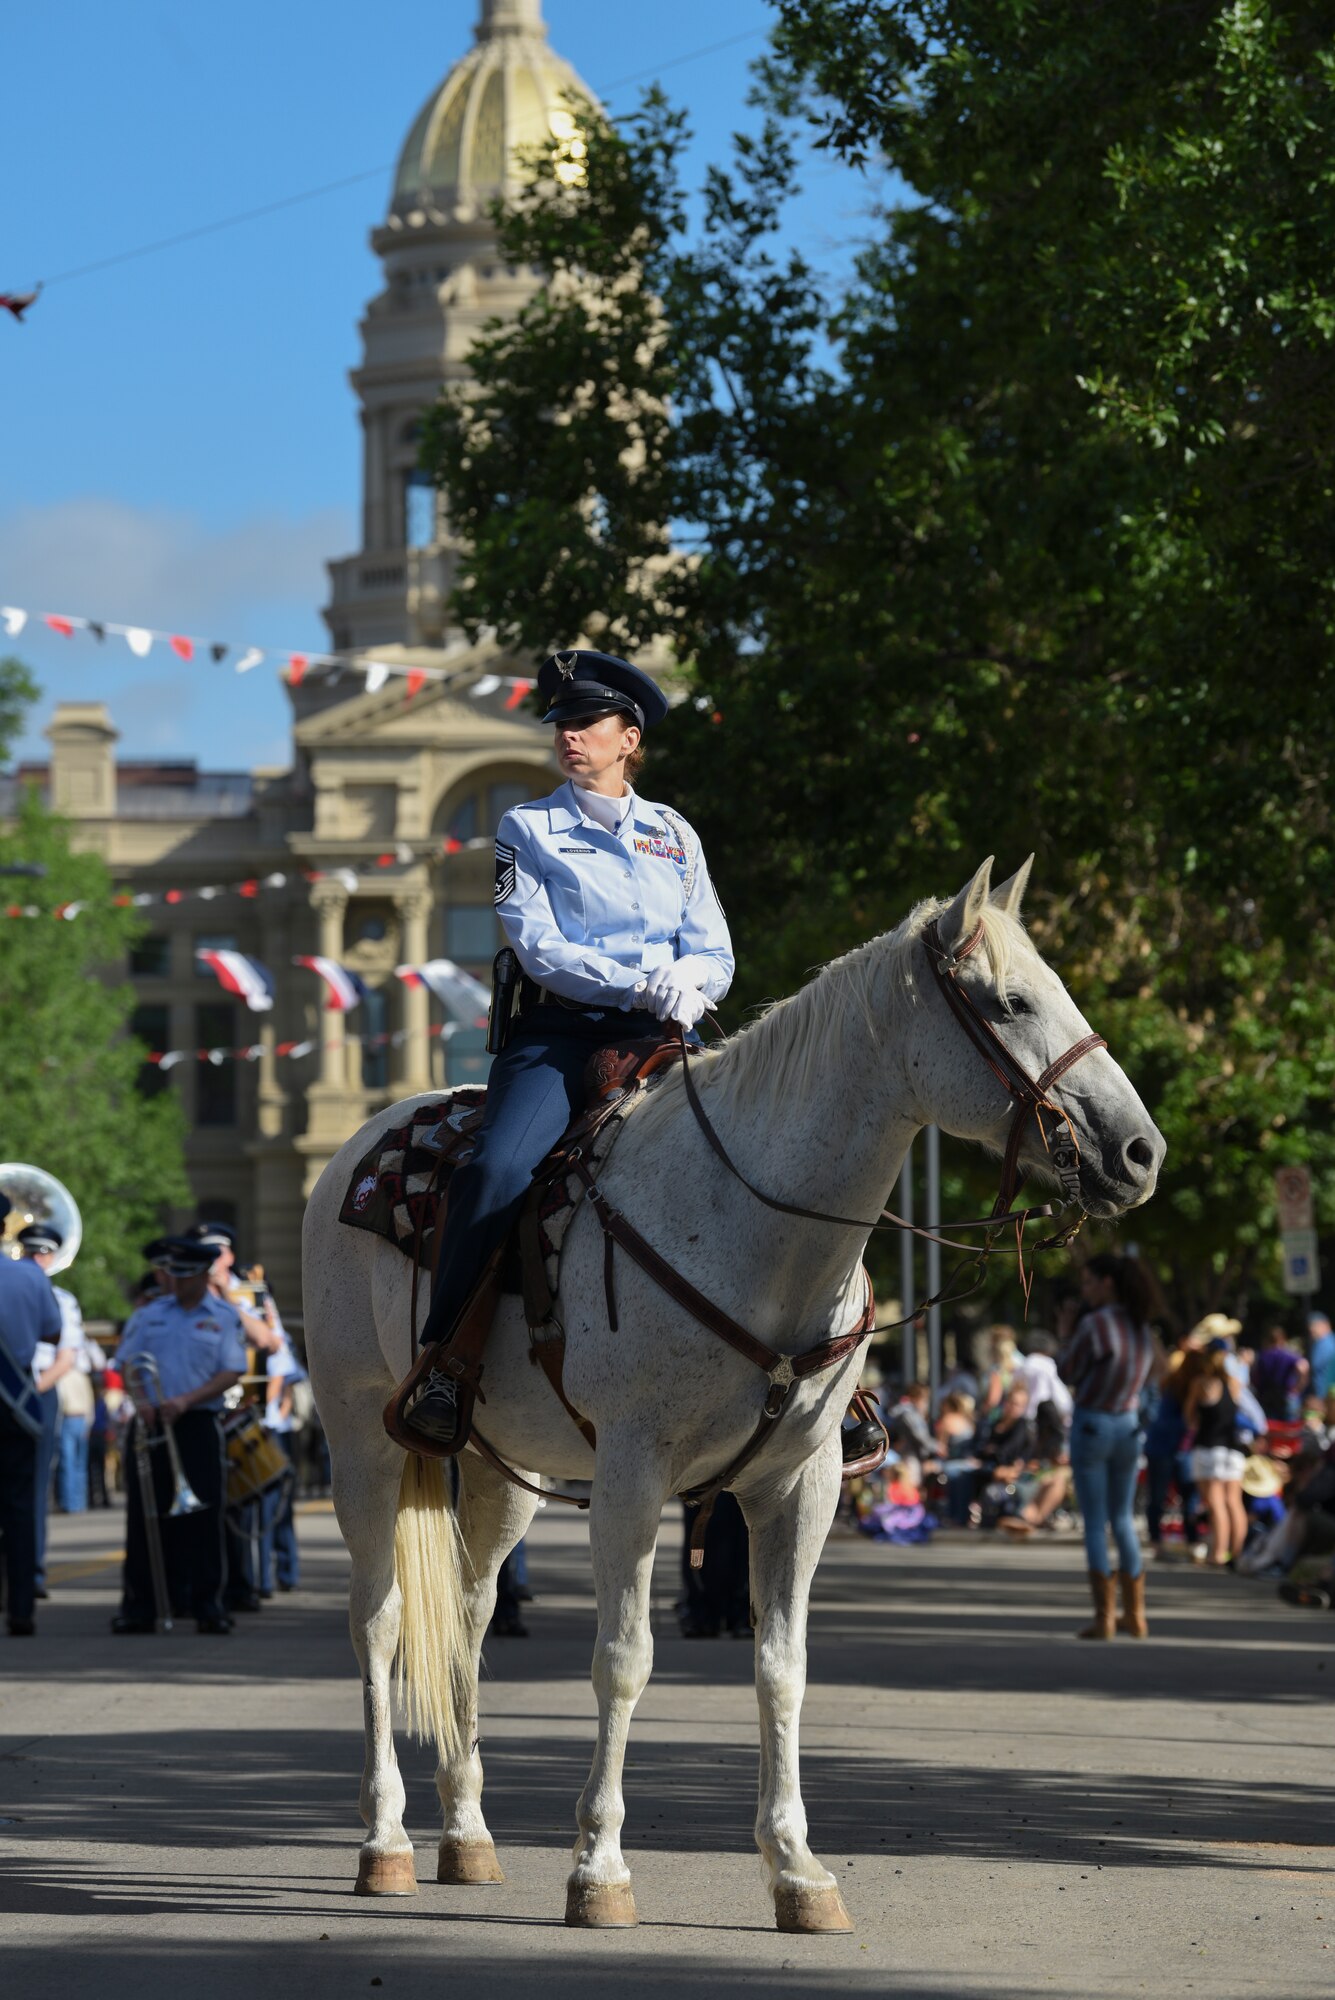 Chief MSgt. Jennifer Lovering, 153rd Communications Flight operations superintendent, rides her horse at the capitol building during the Grand Parade, July 20, 2019. This year marks the 152nd anniversary of F.E. Warren Air Force Base and the city of Cheyenne. The F.E. Warren Air Force Base and Cheyenne communities came together to celebrate the CFD rodeo and festival, which runs from July 19-28. (U.S. Air Force photo by Staff Sgt. Ashley N. Sokolov)